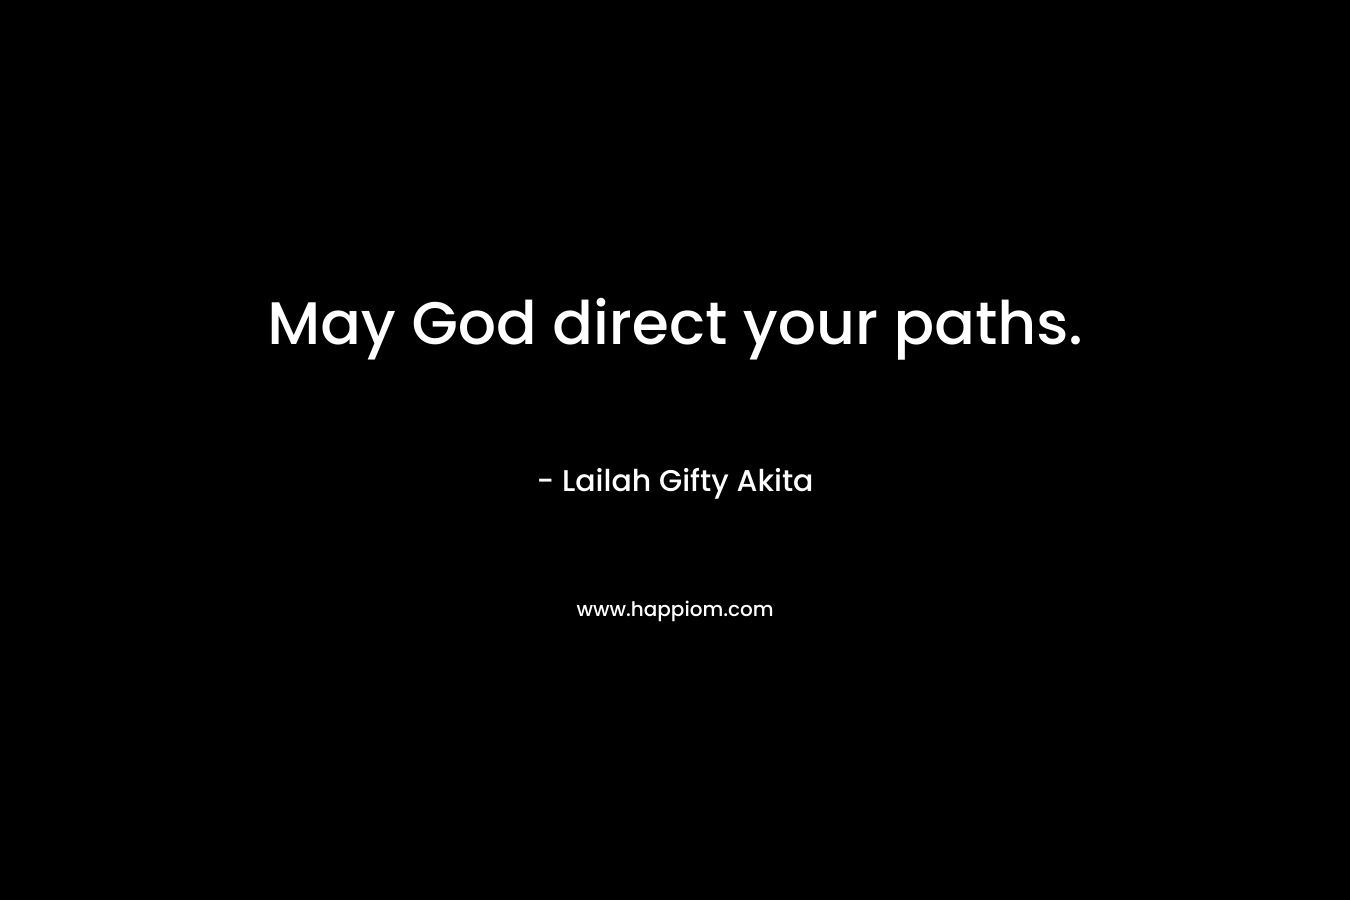 May God direct your paths.